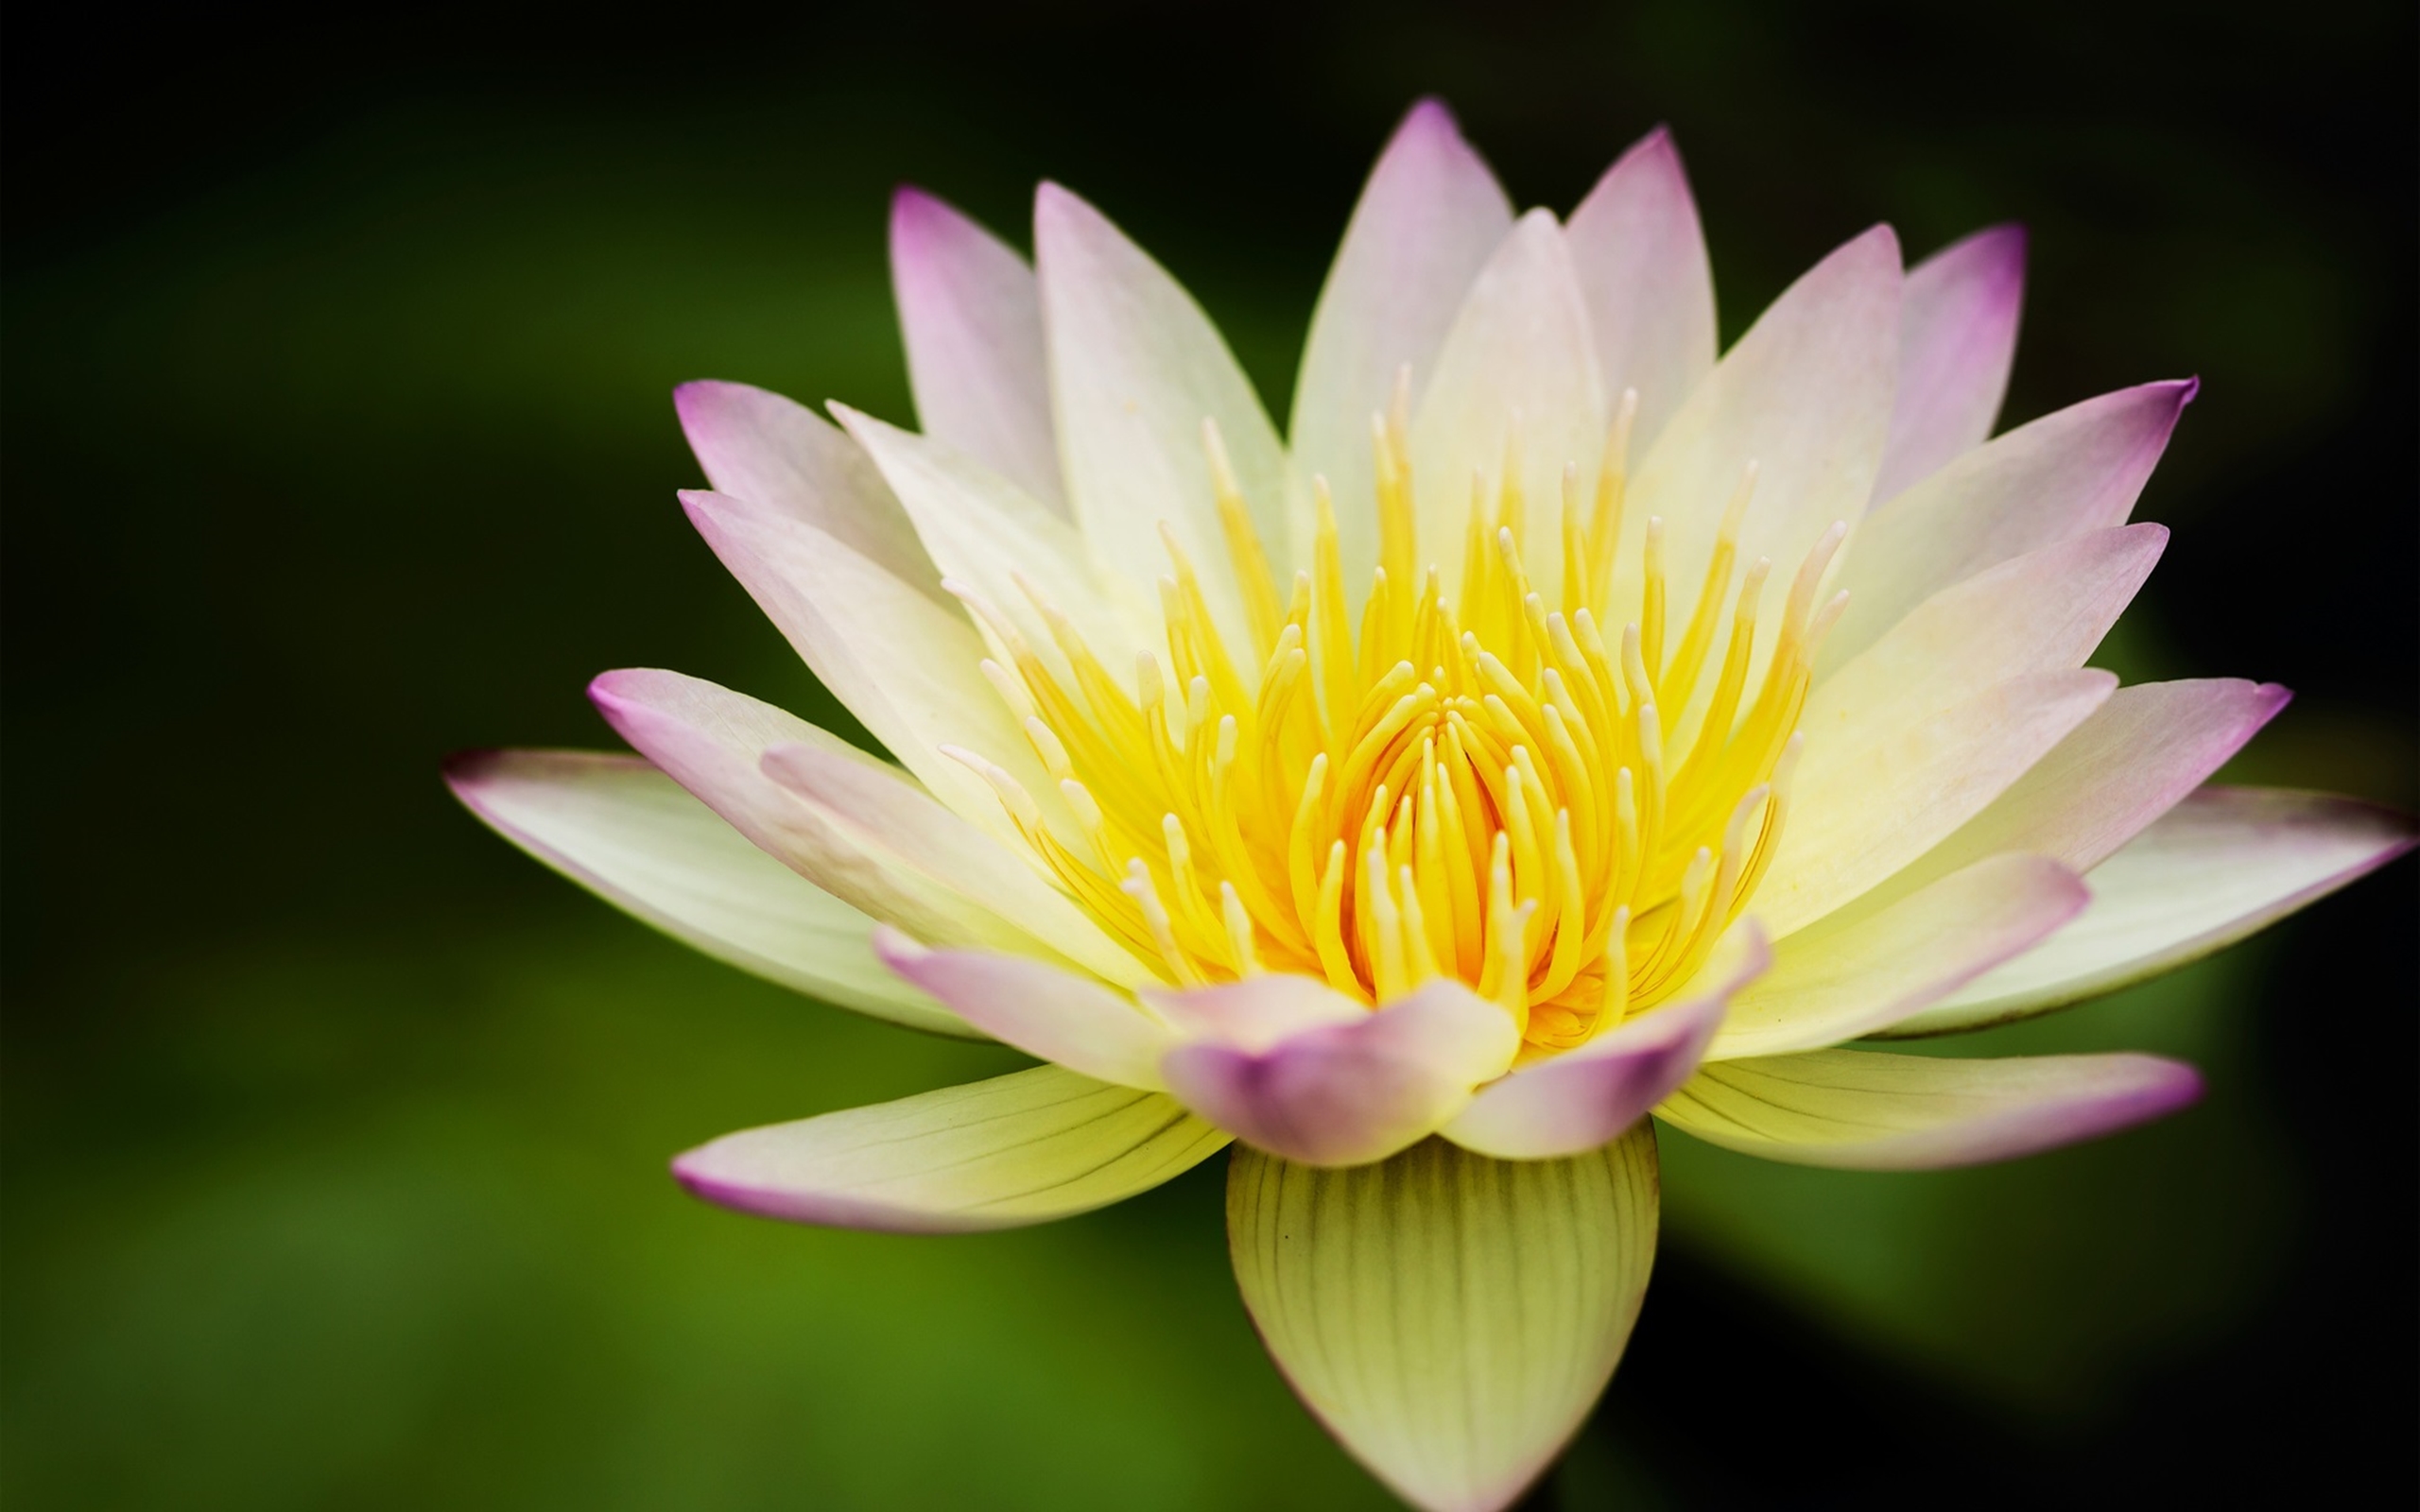 Flower Lotus Yellow White Water Lily 2560x1600 : Wallpapers13.com